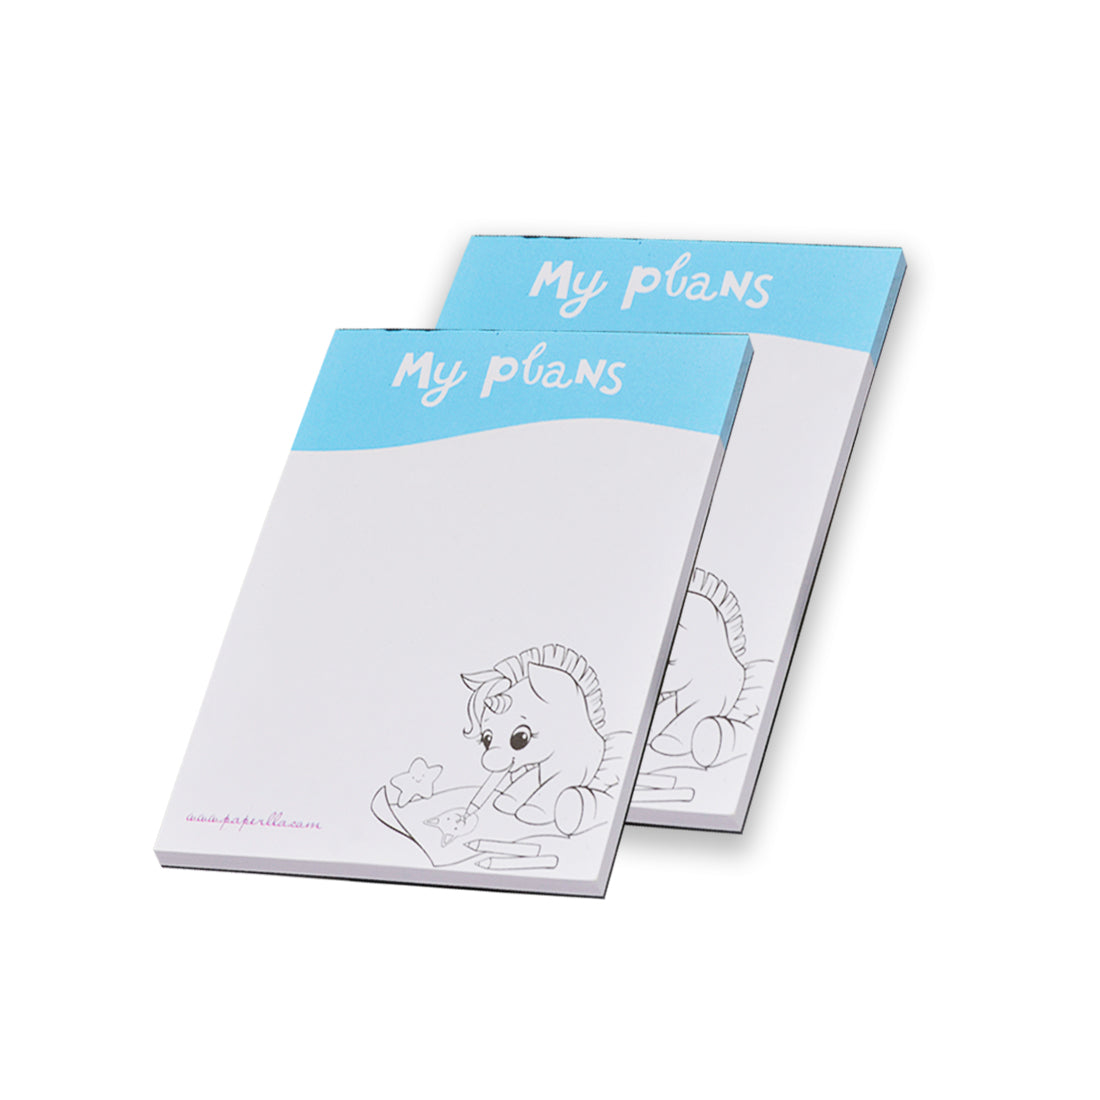 SMALL WRITING PADS NOTEPADS, TO DO LIST PLANNER JOURNAL ORGANIZER OFFICE STATIONERY ITEMS GIFTS FOR SCHOOL KIDS, SET OF 4